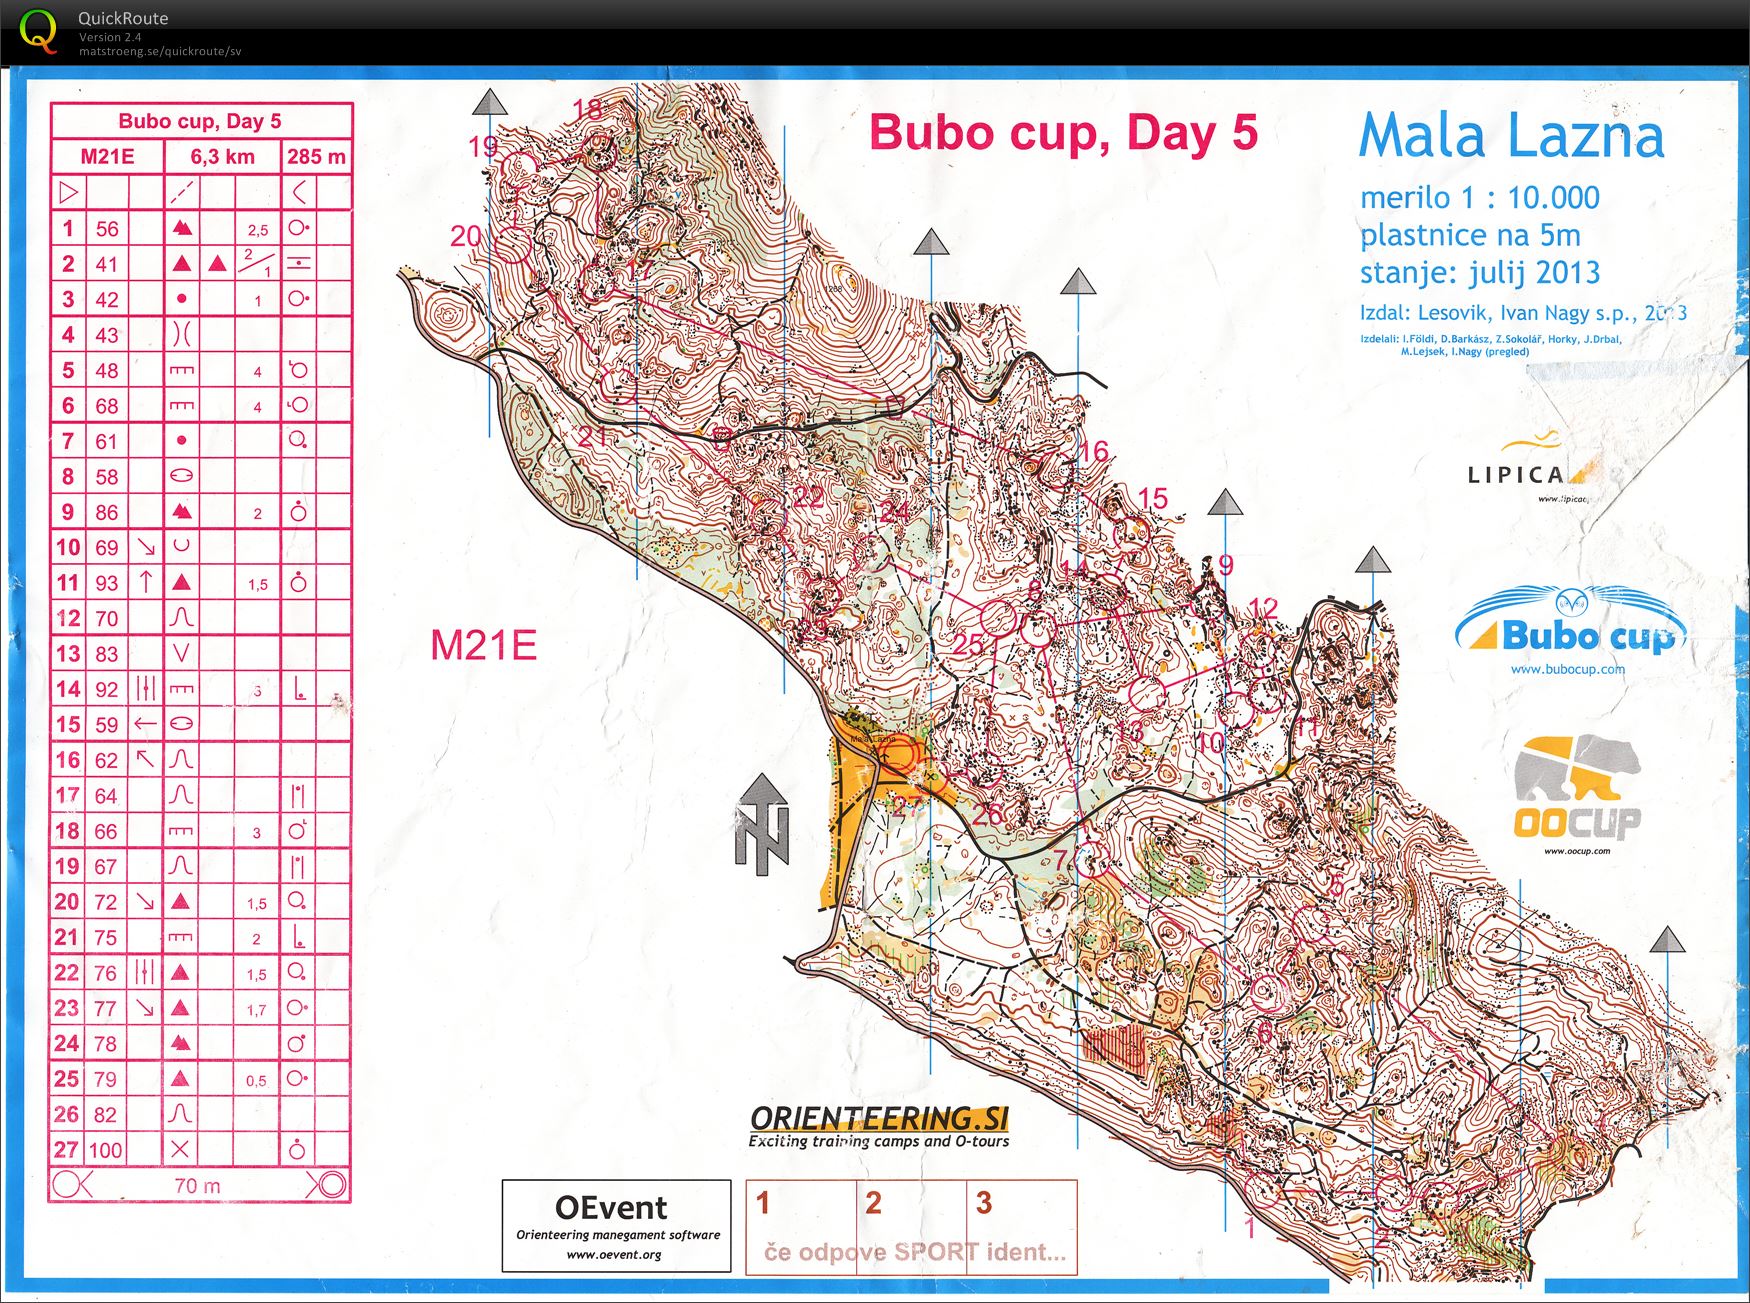 Bubo cup, Day 5 (2013-07-23)